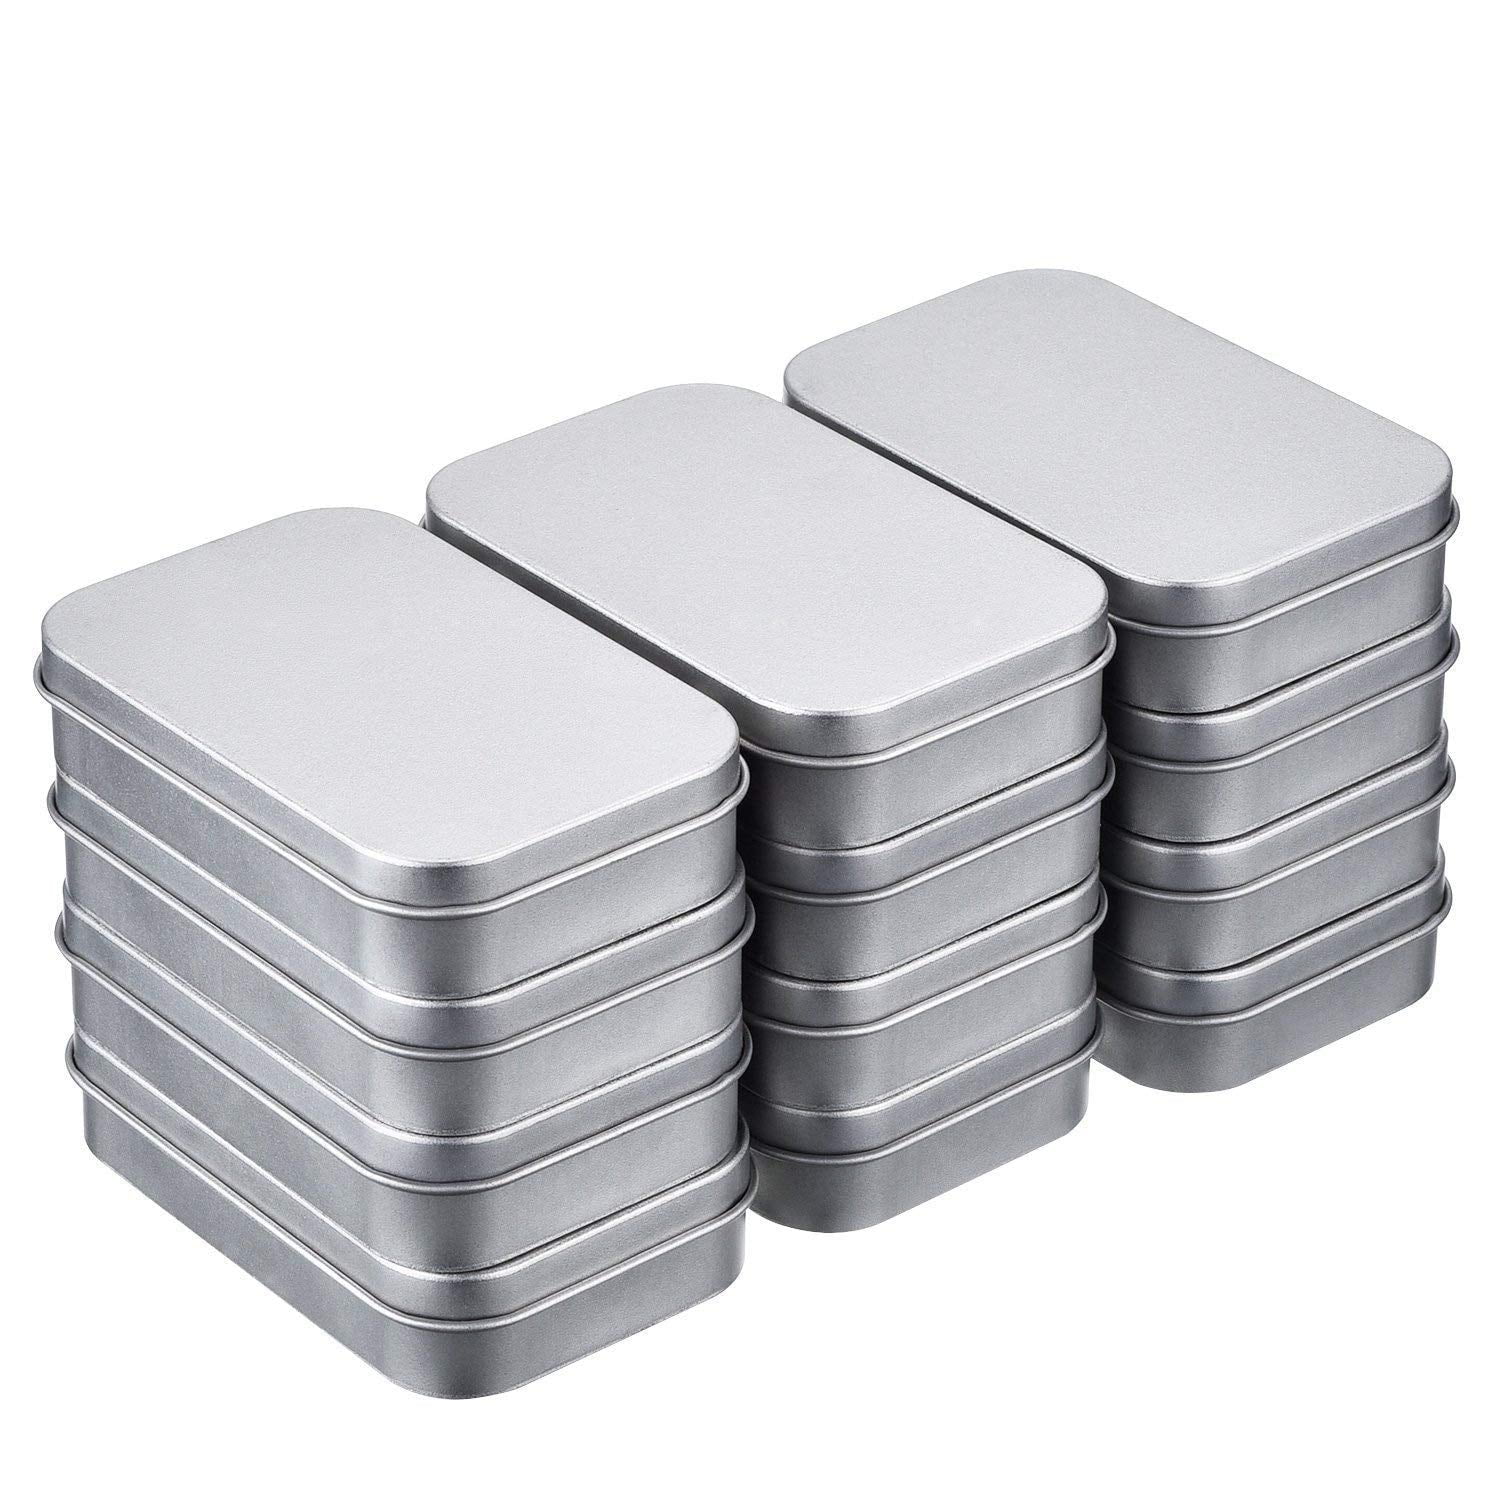 20 Pieces Rectangular Metal Empty Hinged Tins Containers Basic Necessities Home 